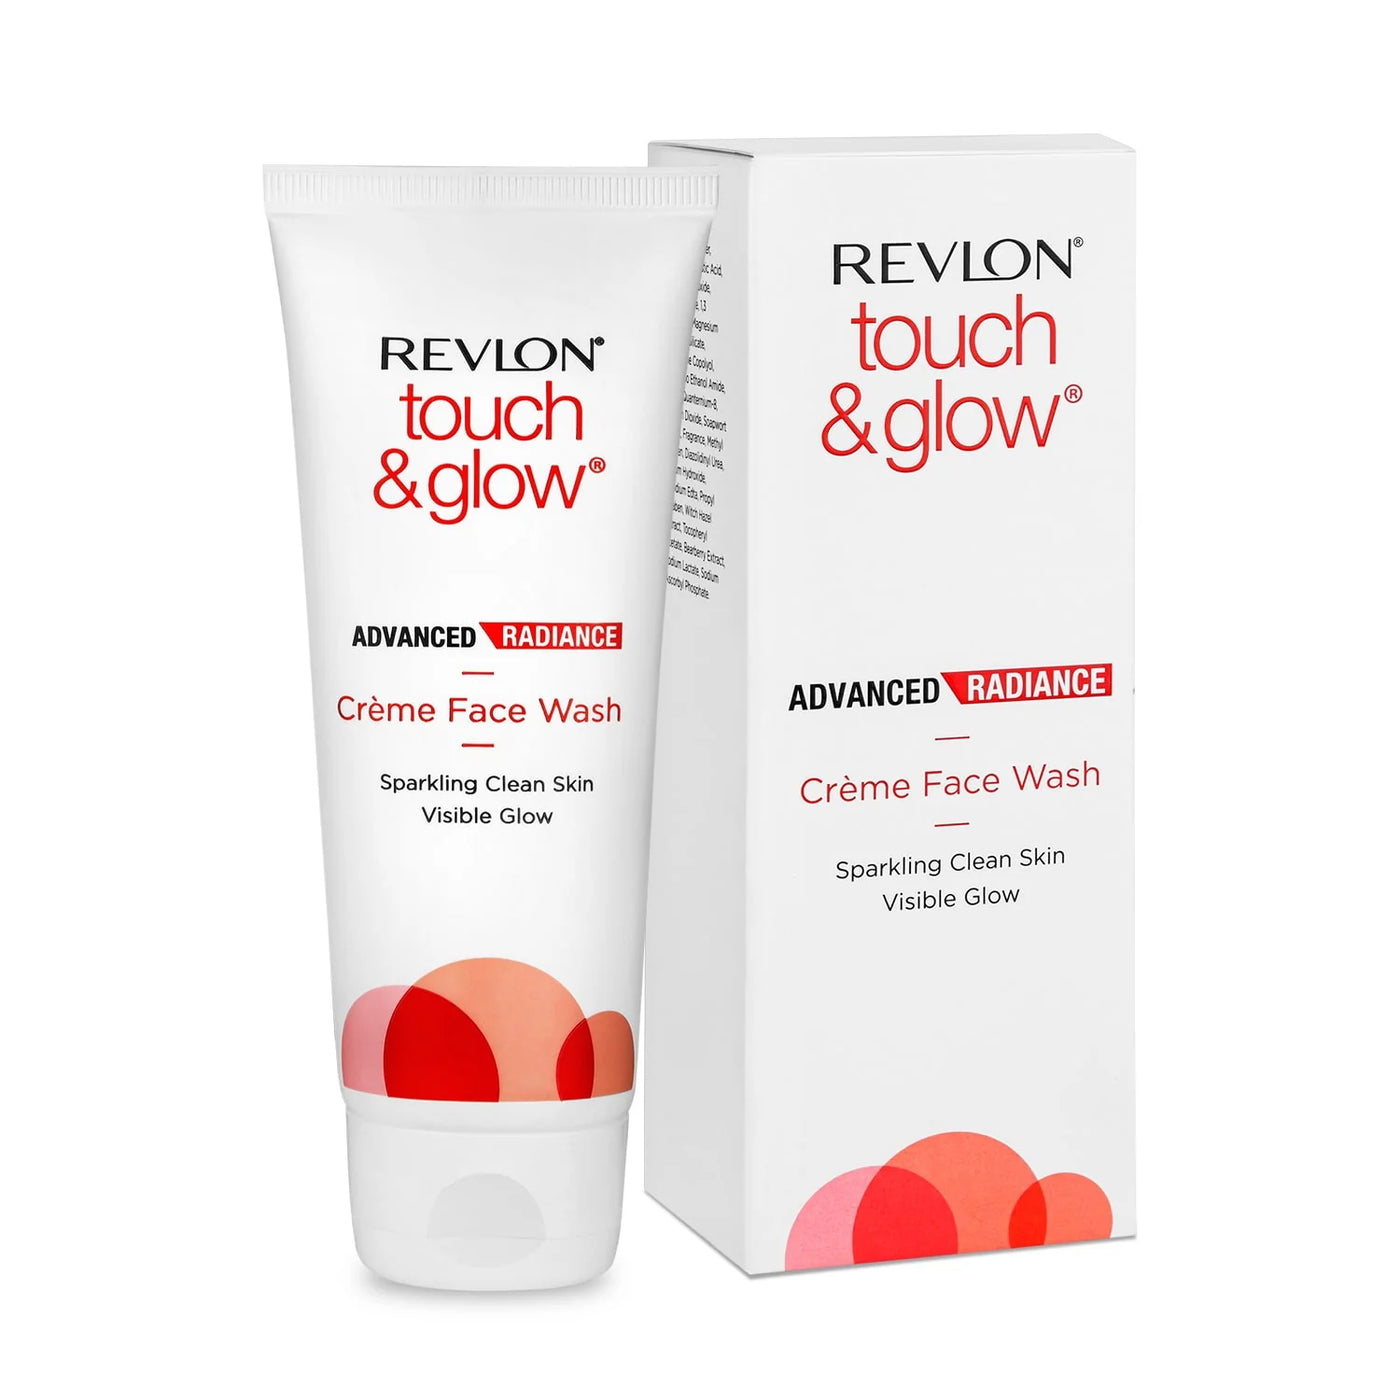 Touch & Glow Advanced Radiance Combo Pack